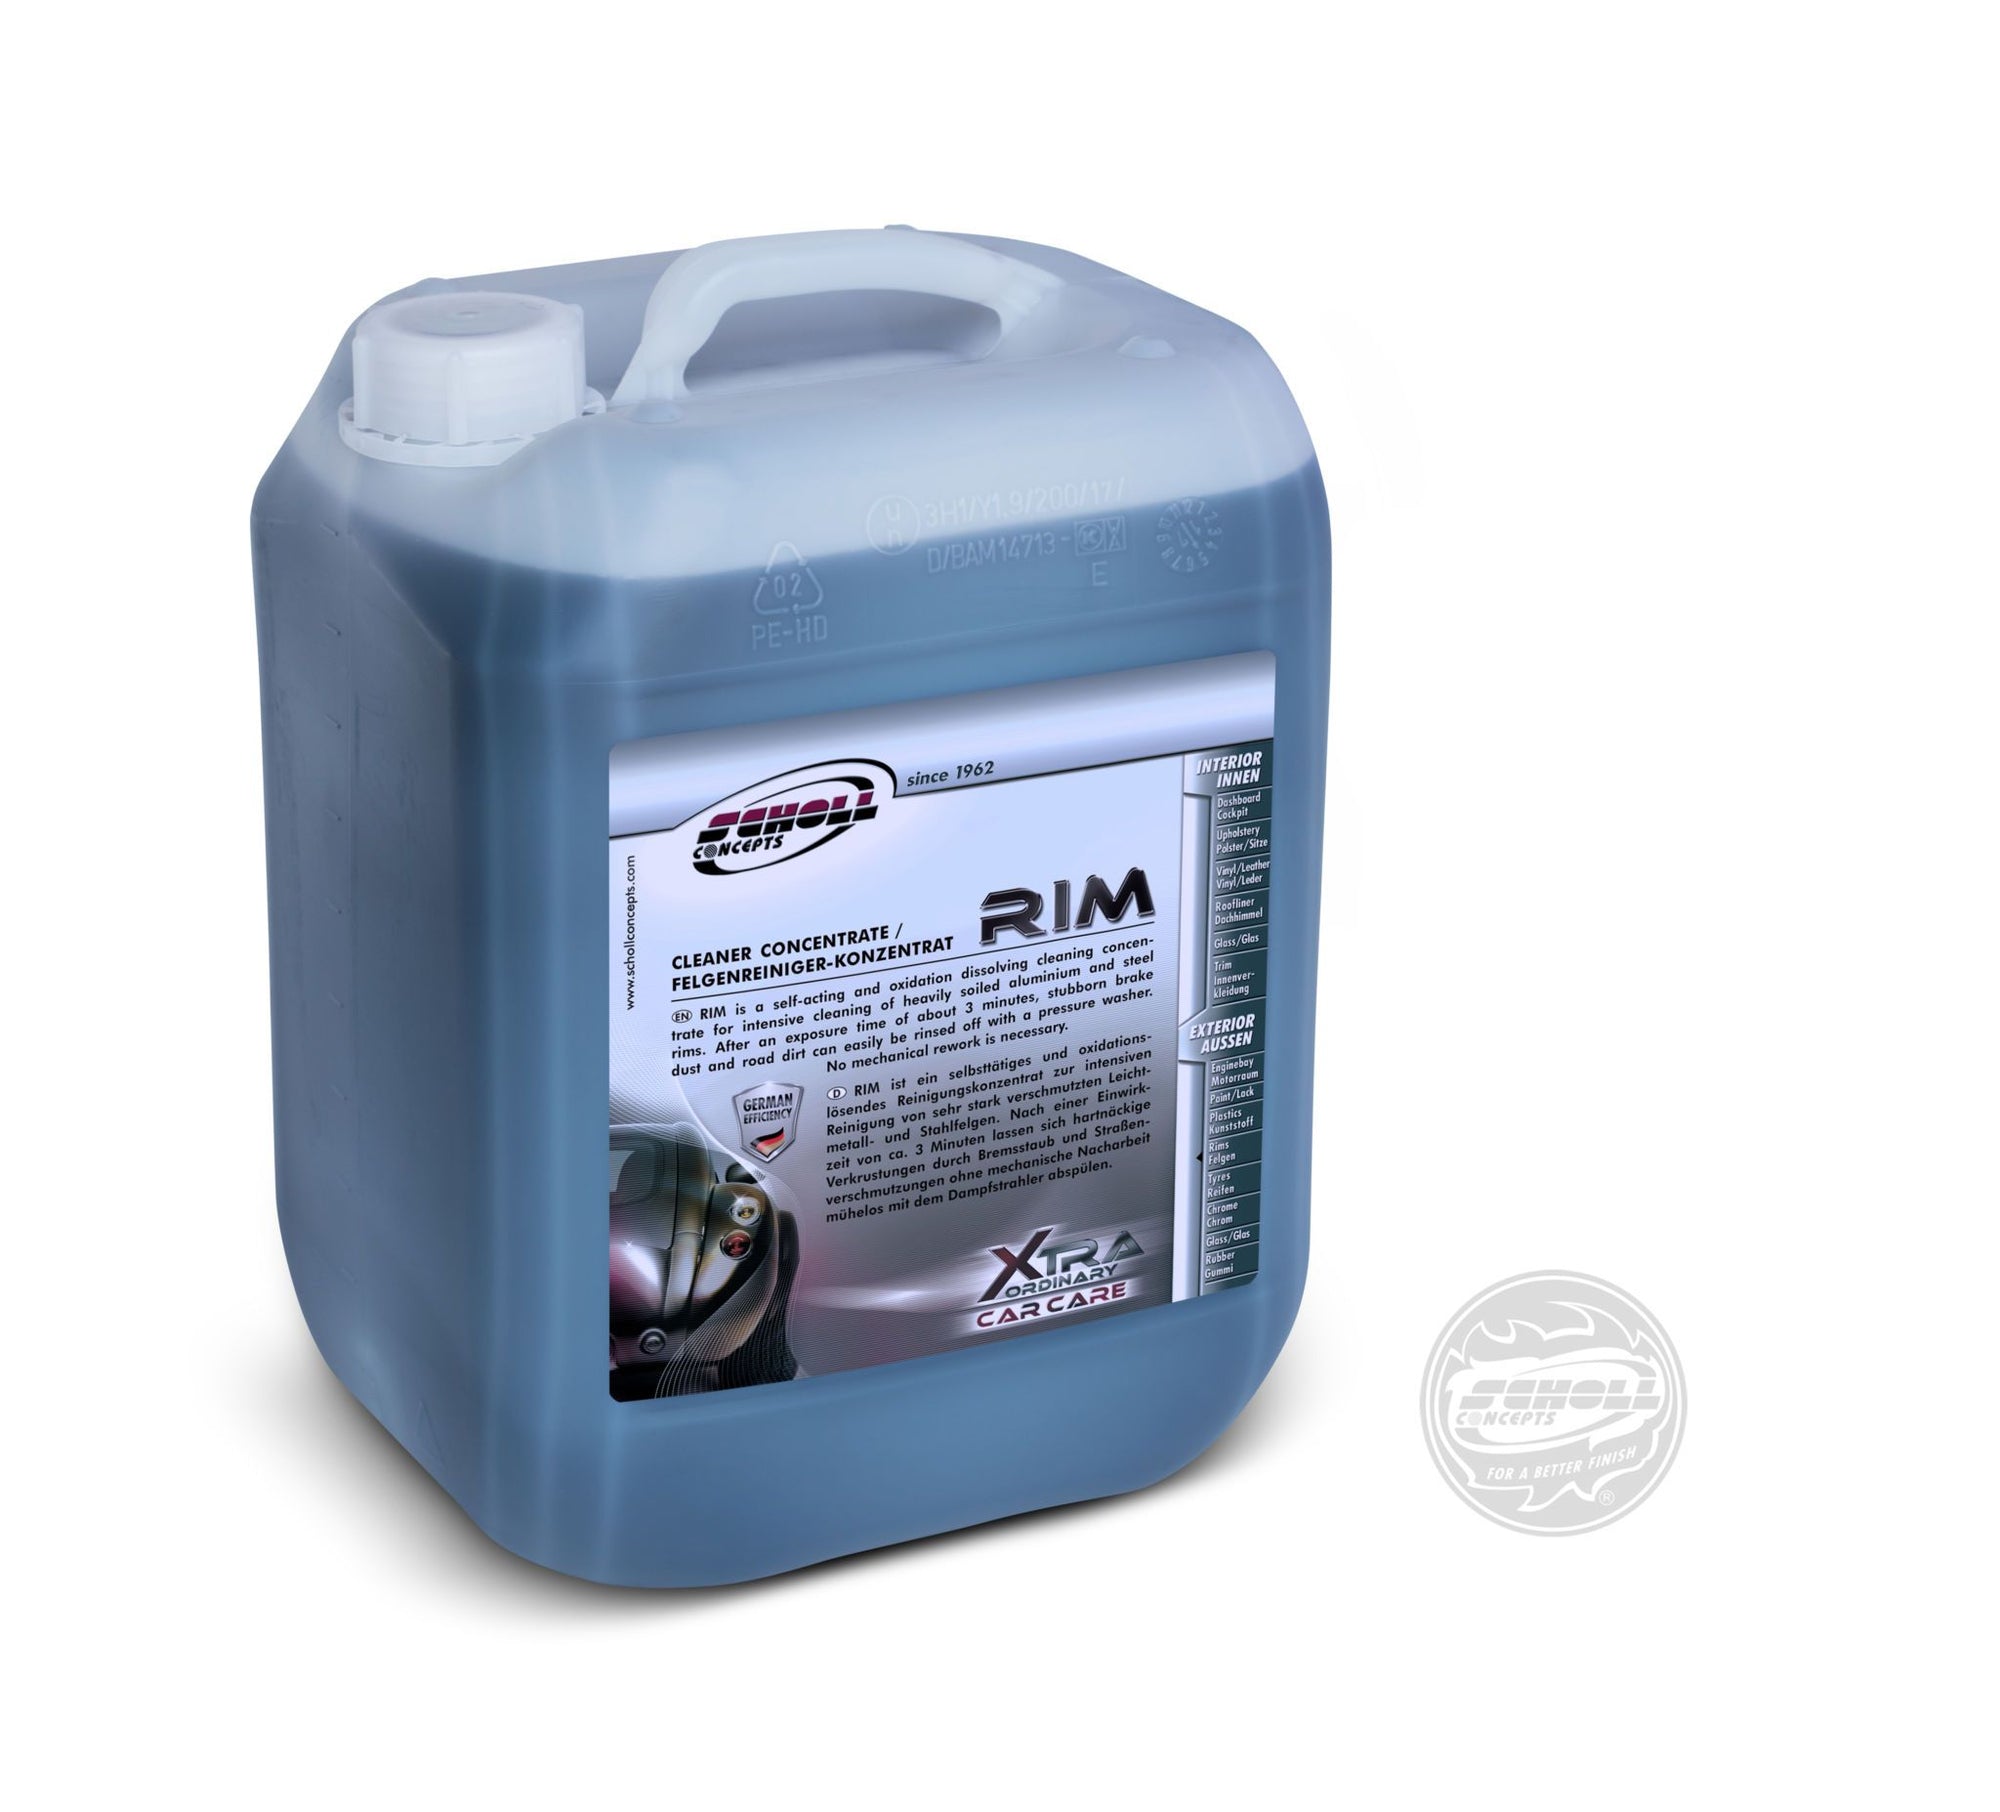 CLEARANCE - RIM wheel & tyre cleaning concentrate 10 Litres - Heavy Duty